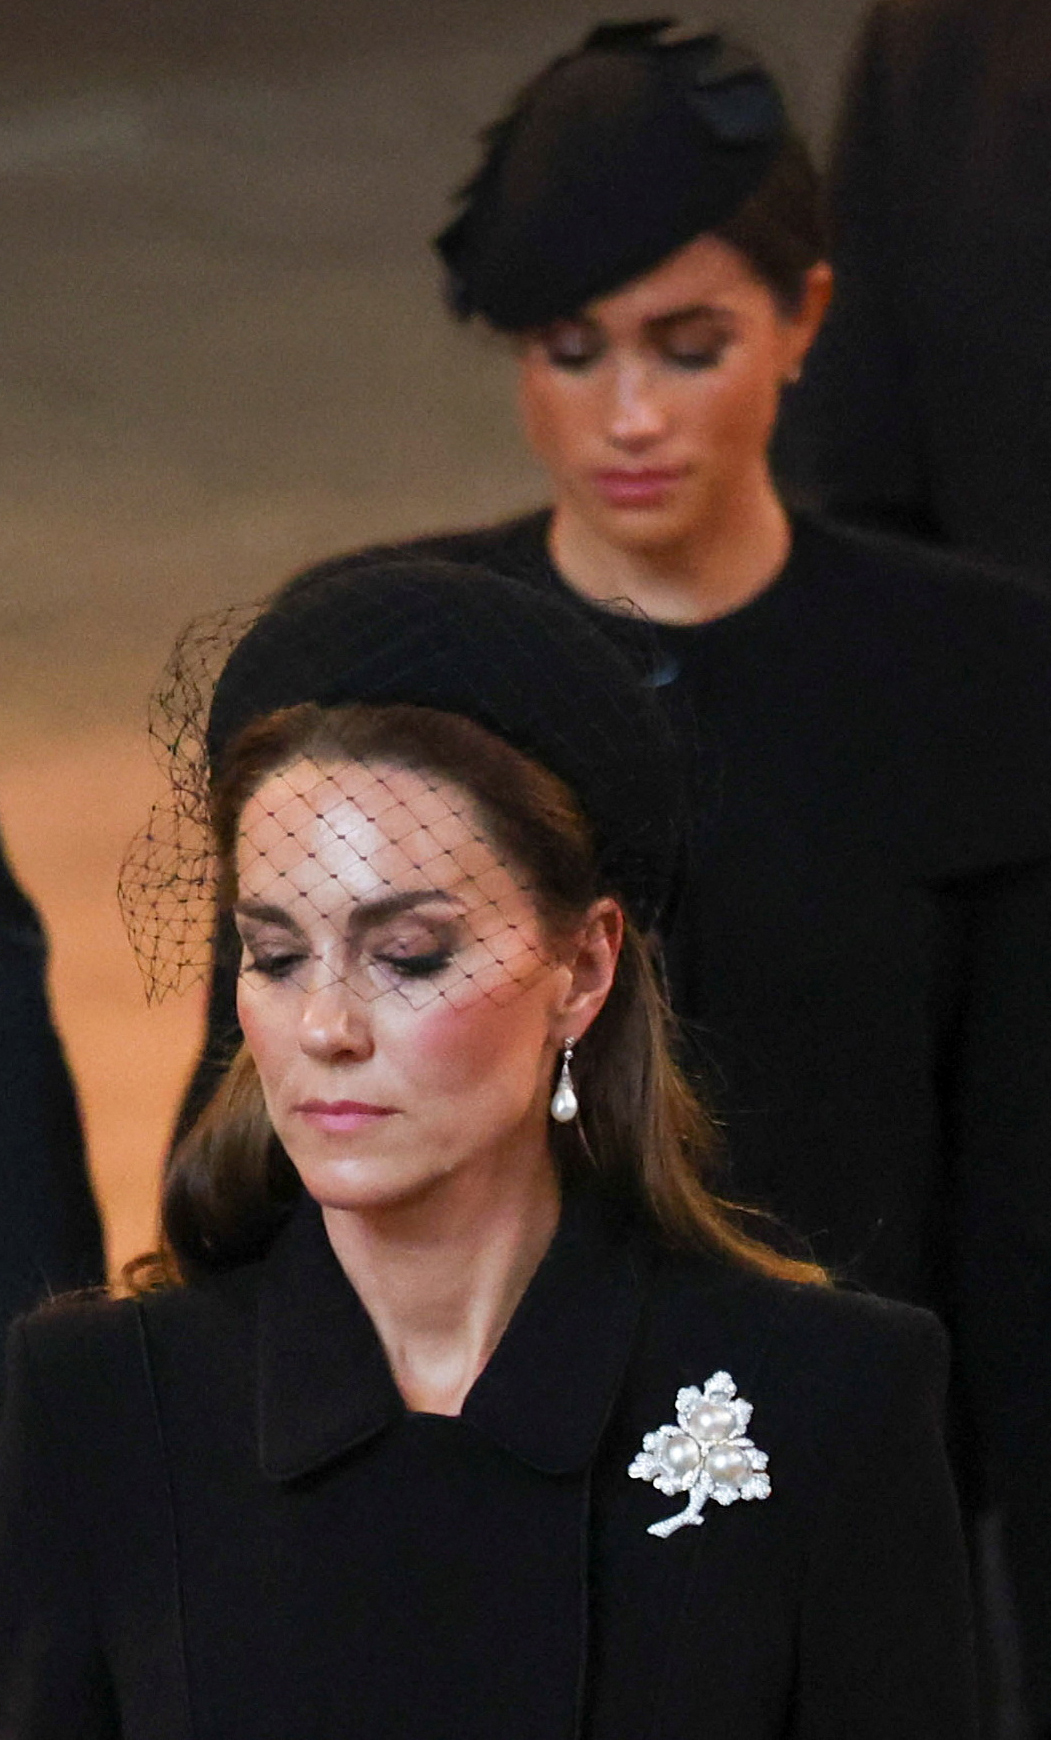 Princess Catherine and Meghan Markle at the State Funeral of Queen Elizabeth II at Westminster Abbey on September 19, 2022 in London, England | Source: Getty Images